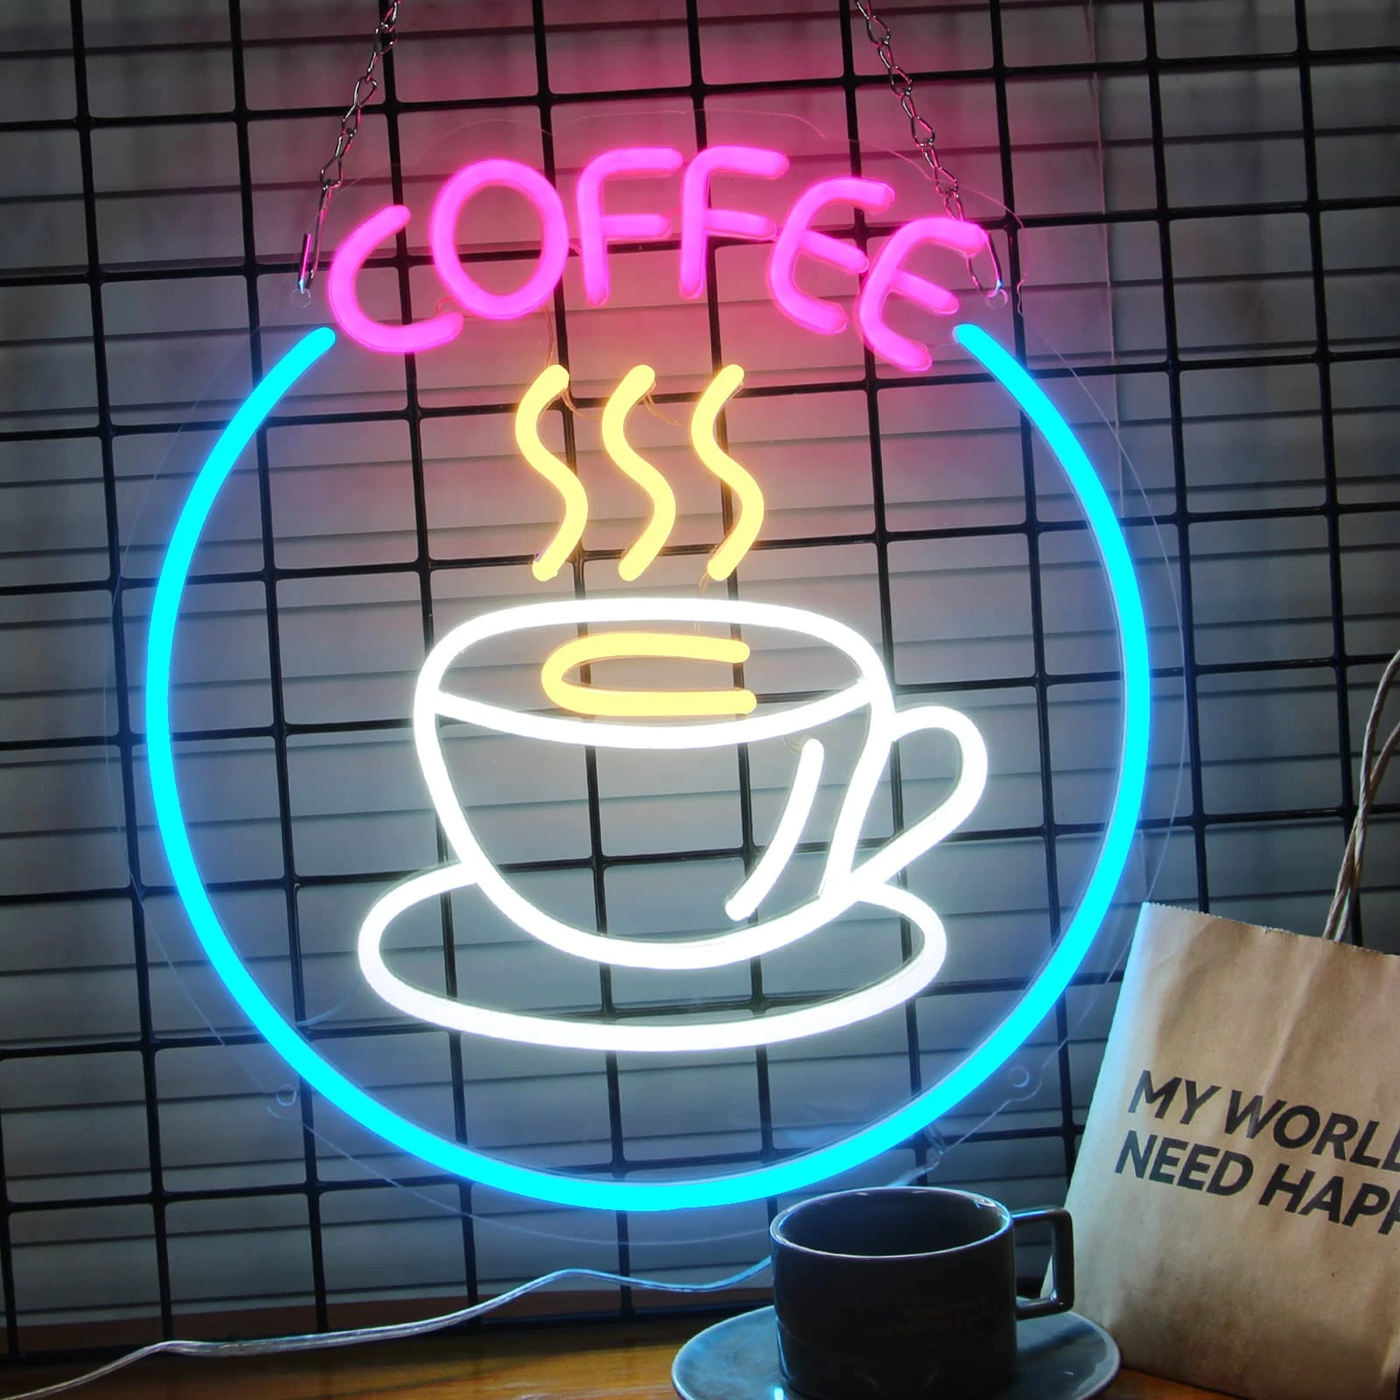 Custom Coffee Neon Signs For Your Cafe Business